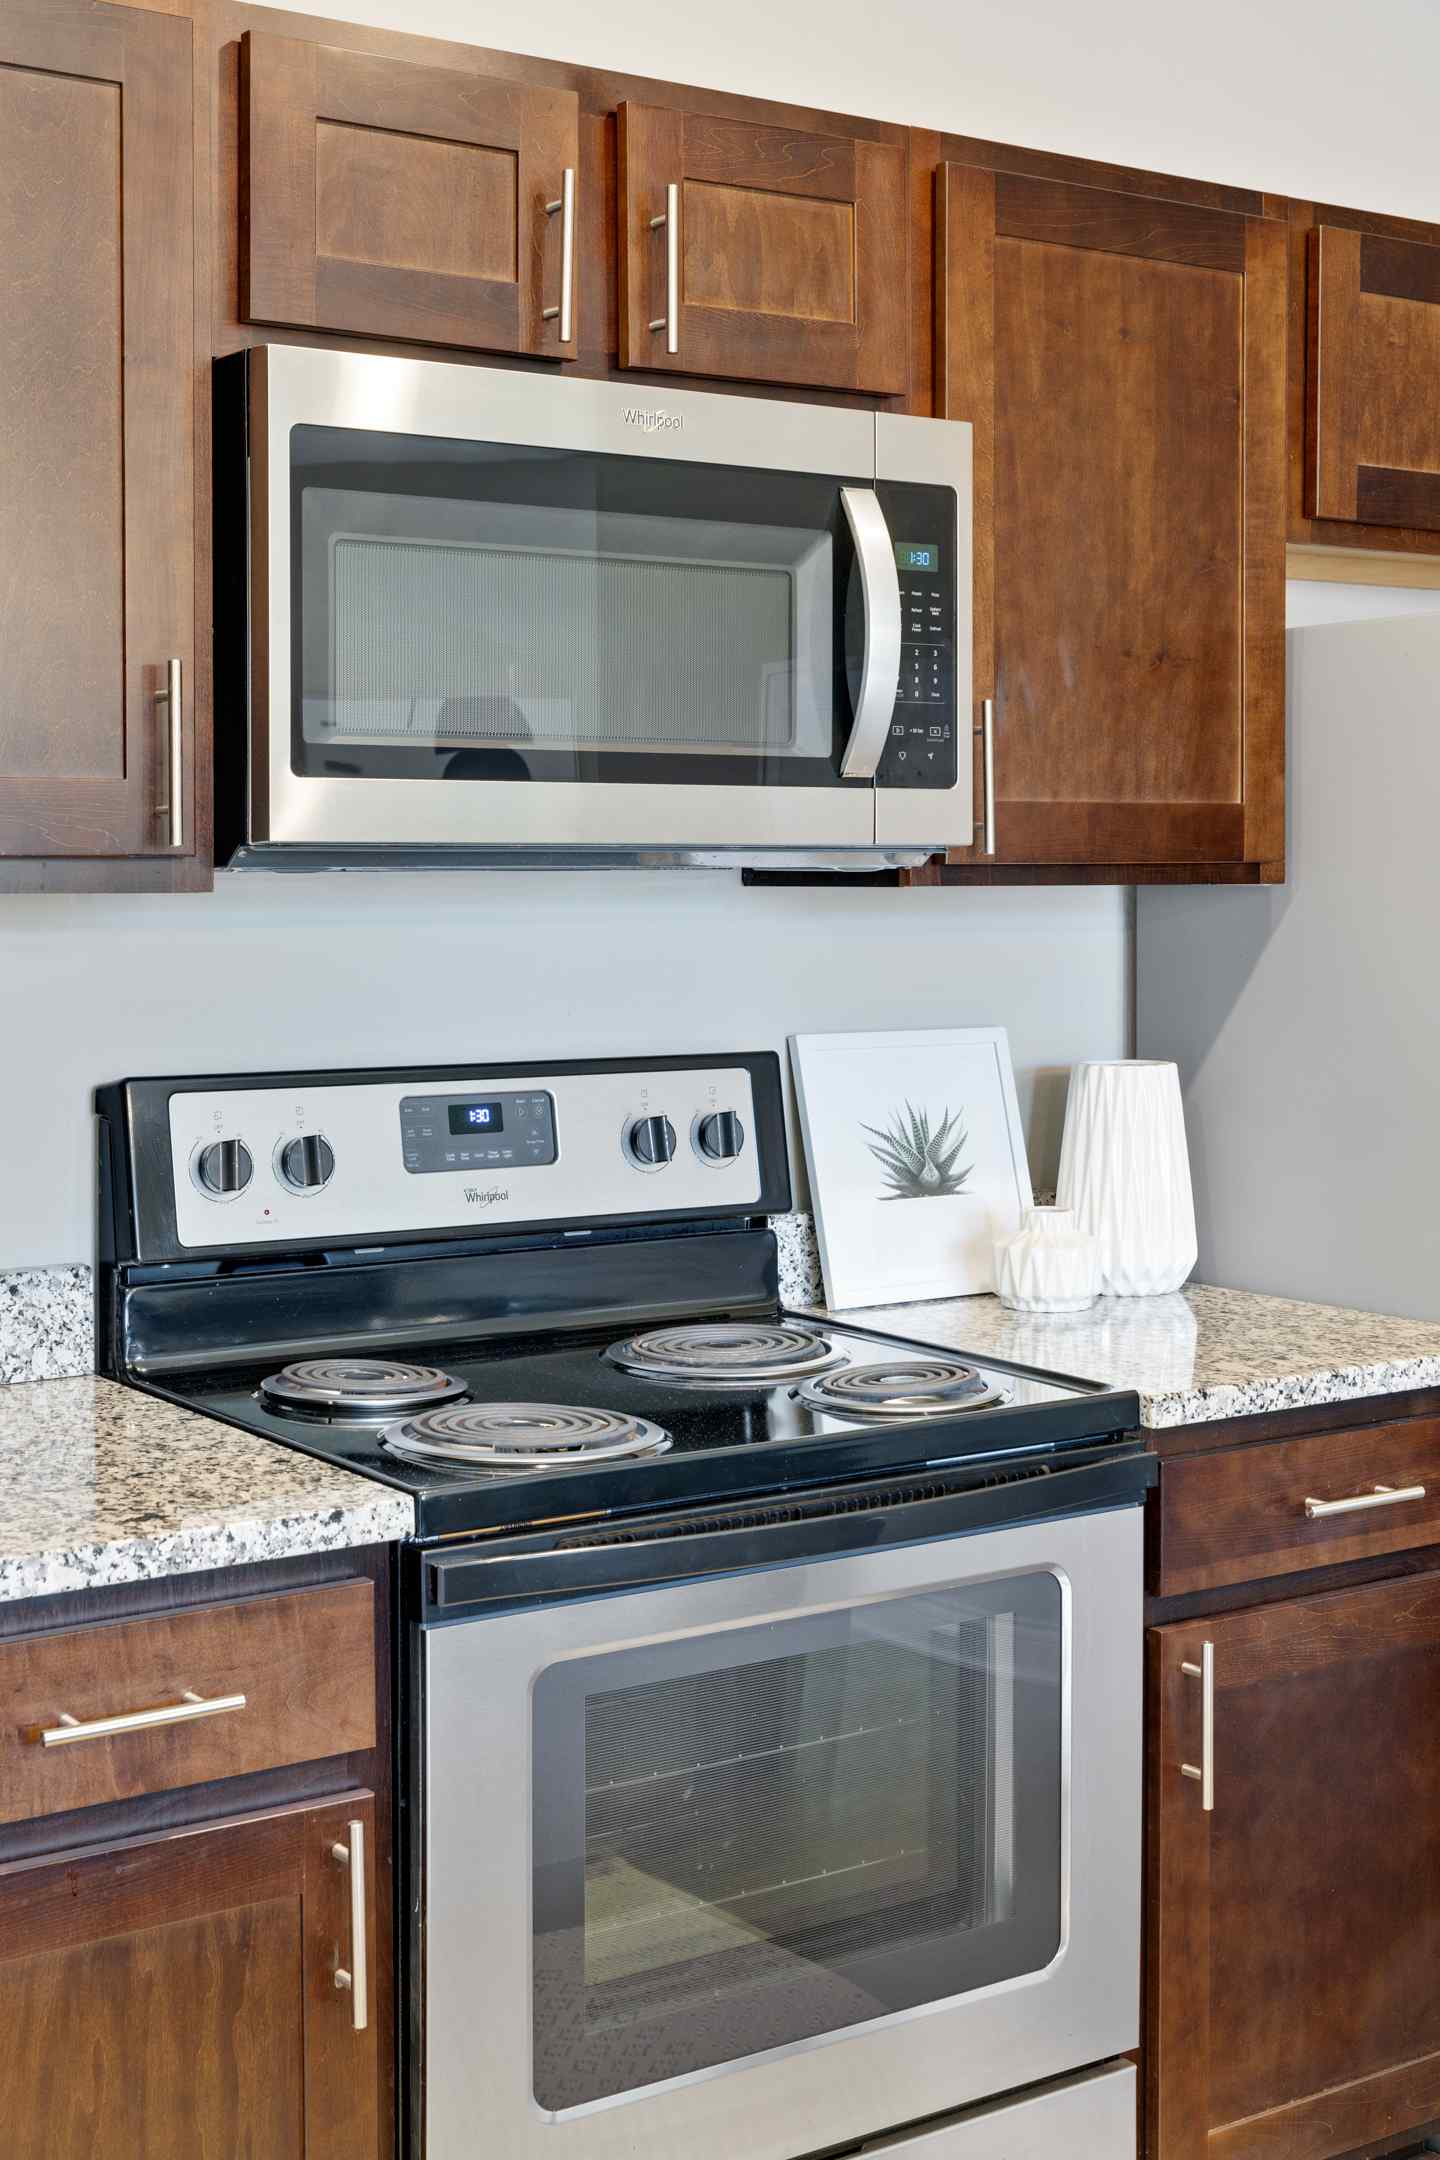 Newly renovated apartment kitchen equipped with modern appliances, including an oven and microwave.